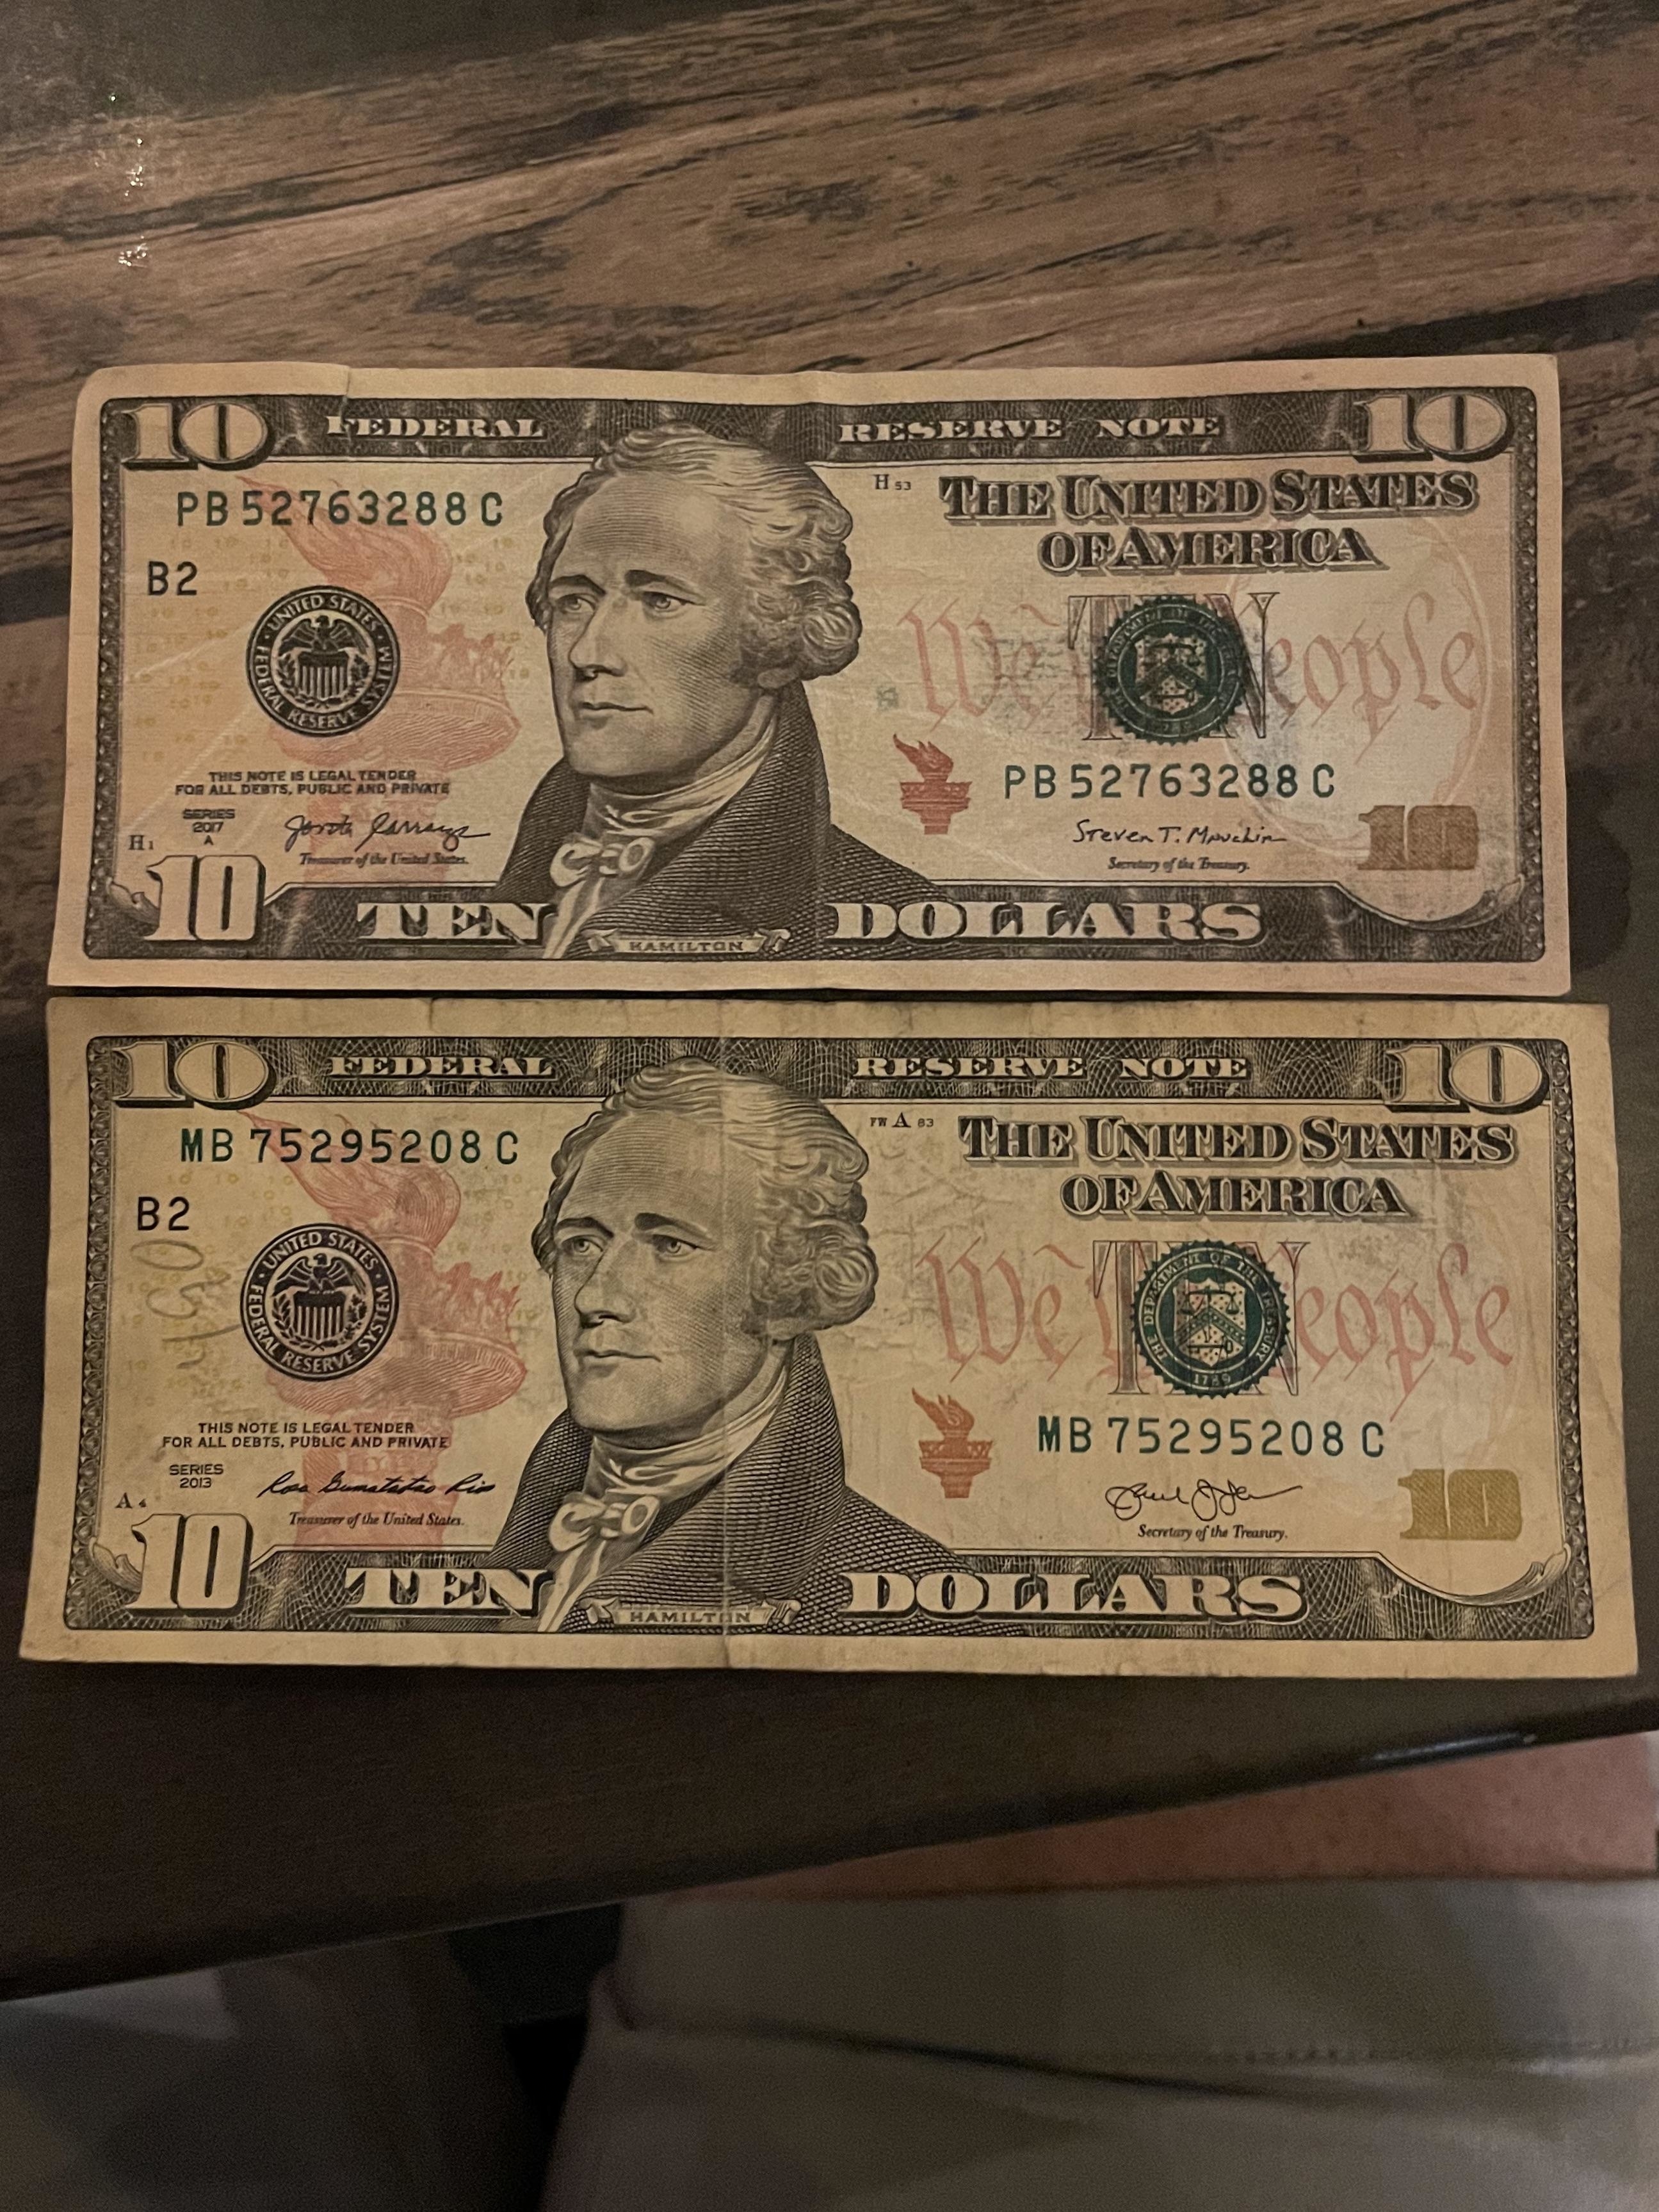 A counterfeit bill next to a real one